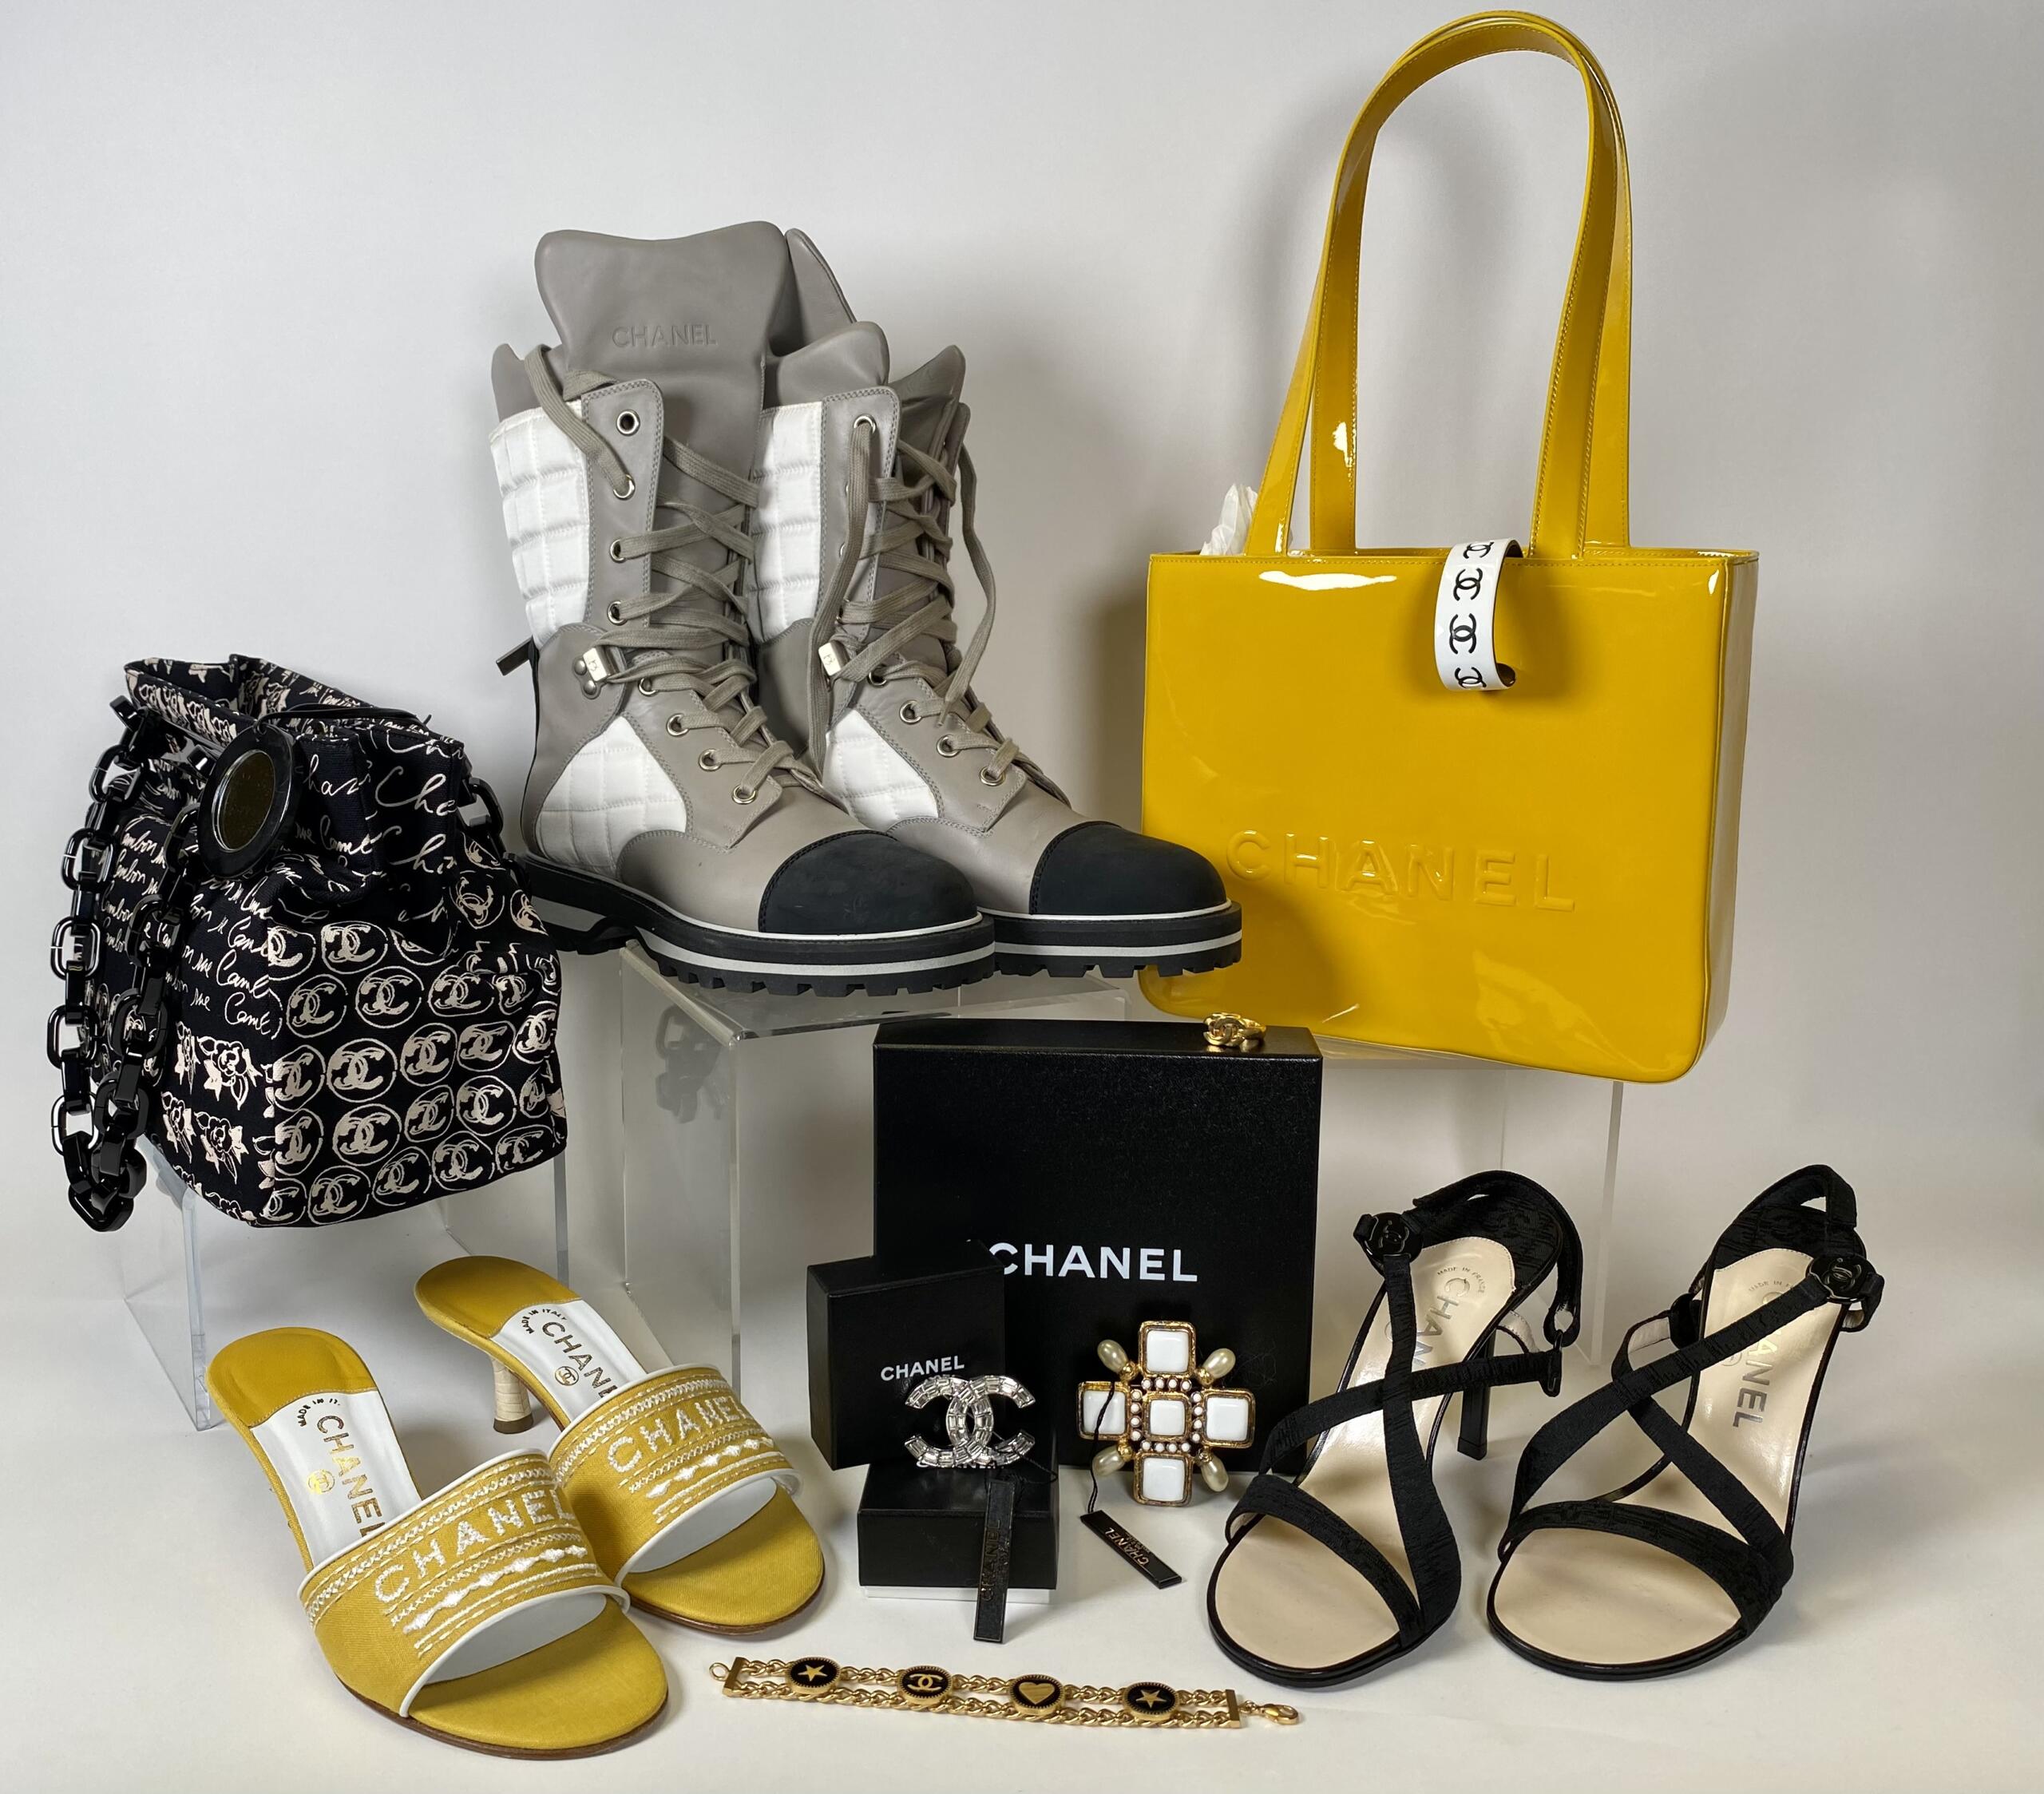 Extensive collection of authentic 1990's Chanel French luxury